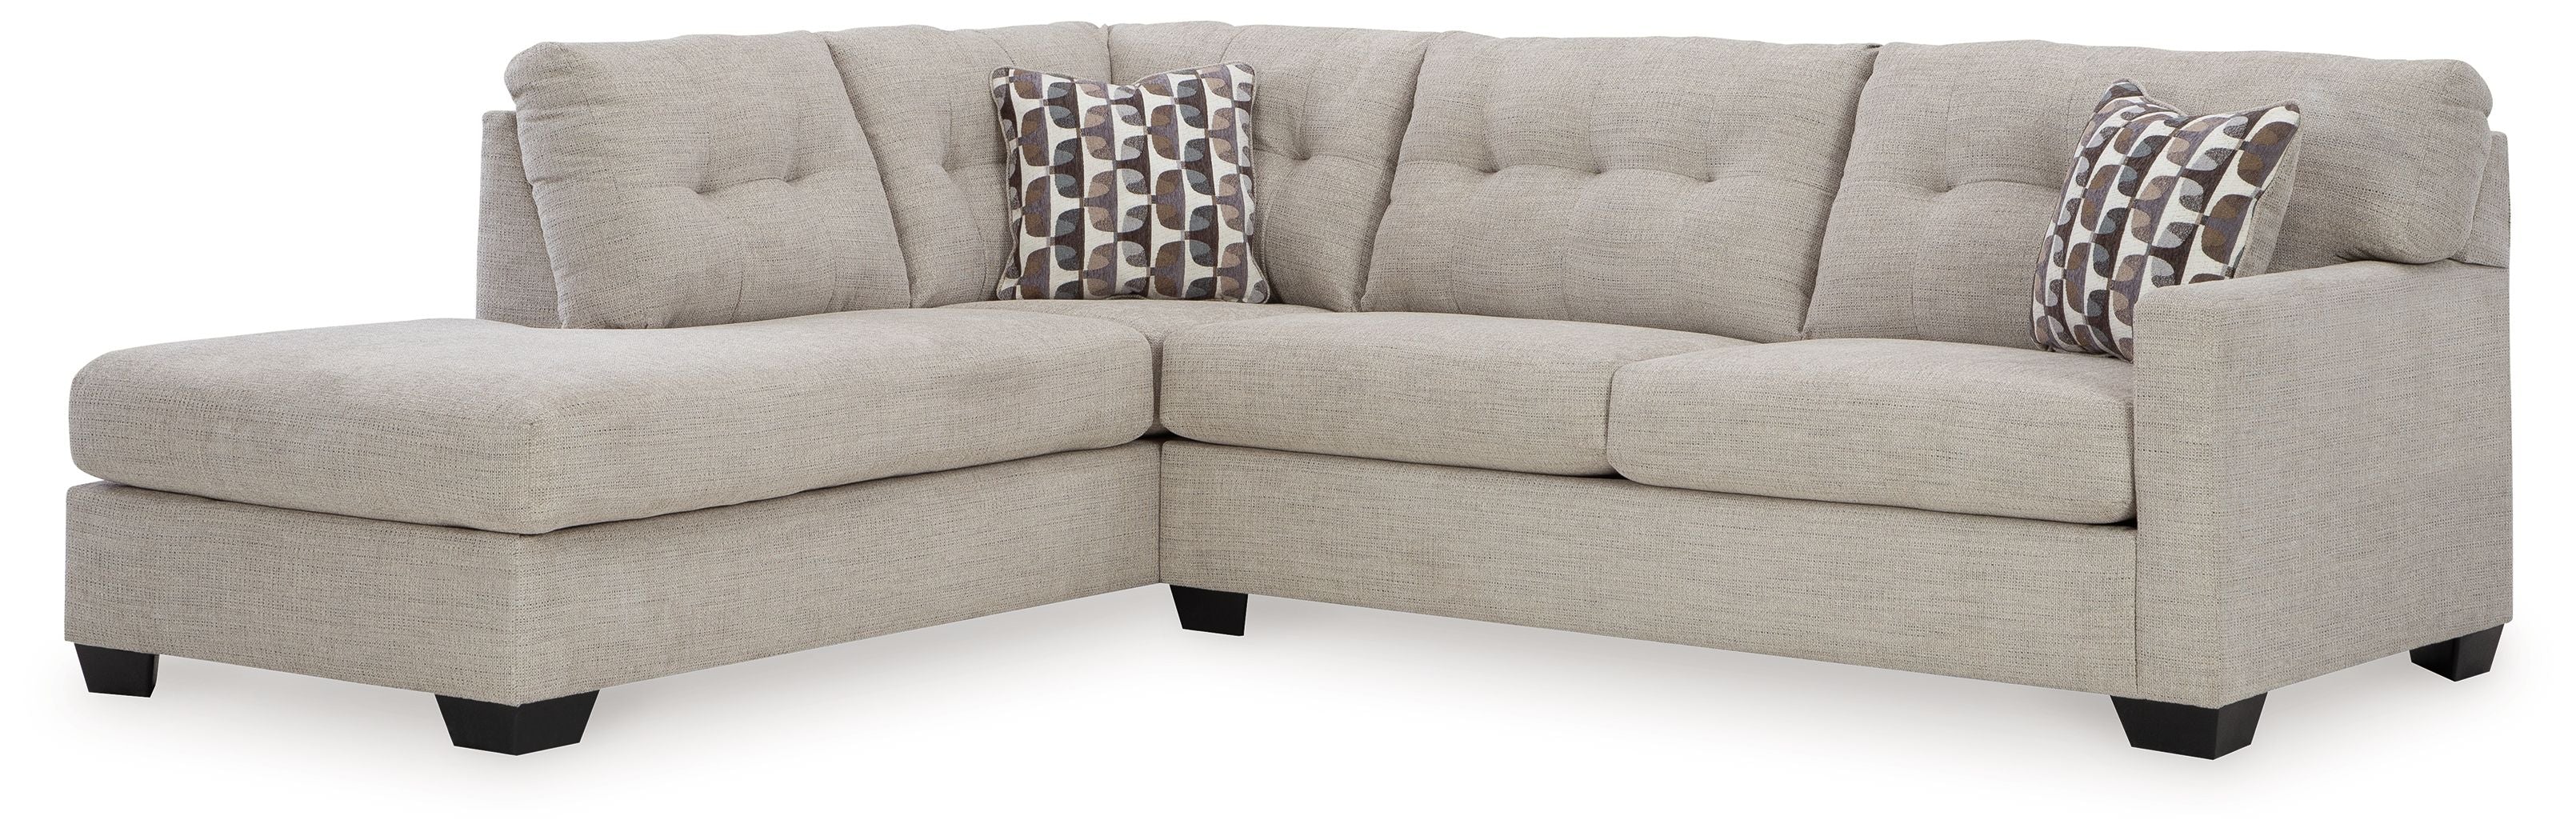 mahoney l shaped sectional